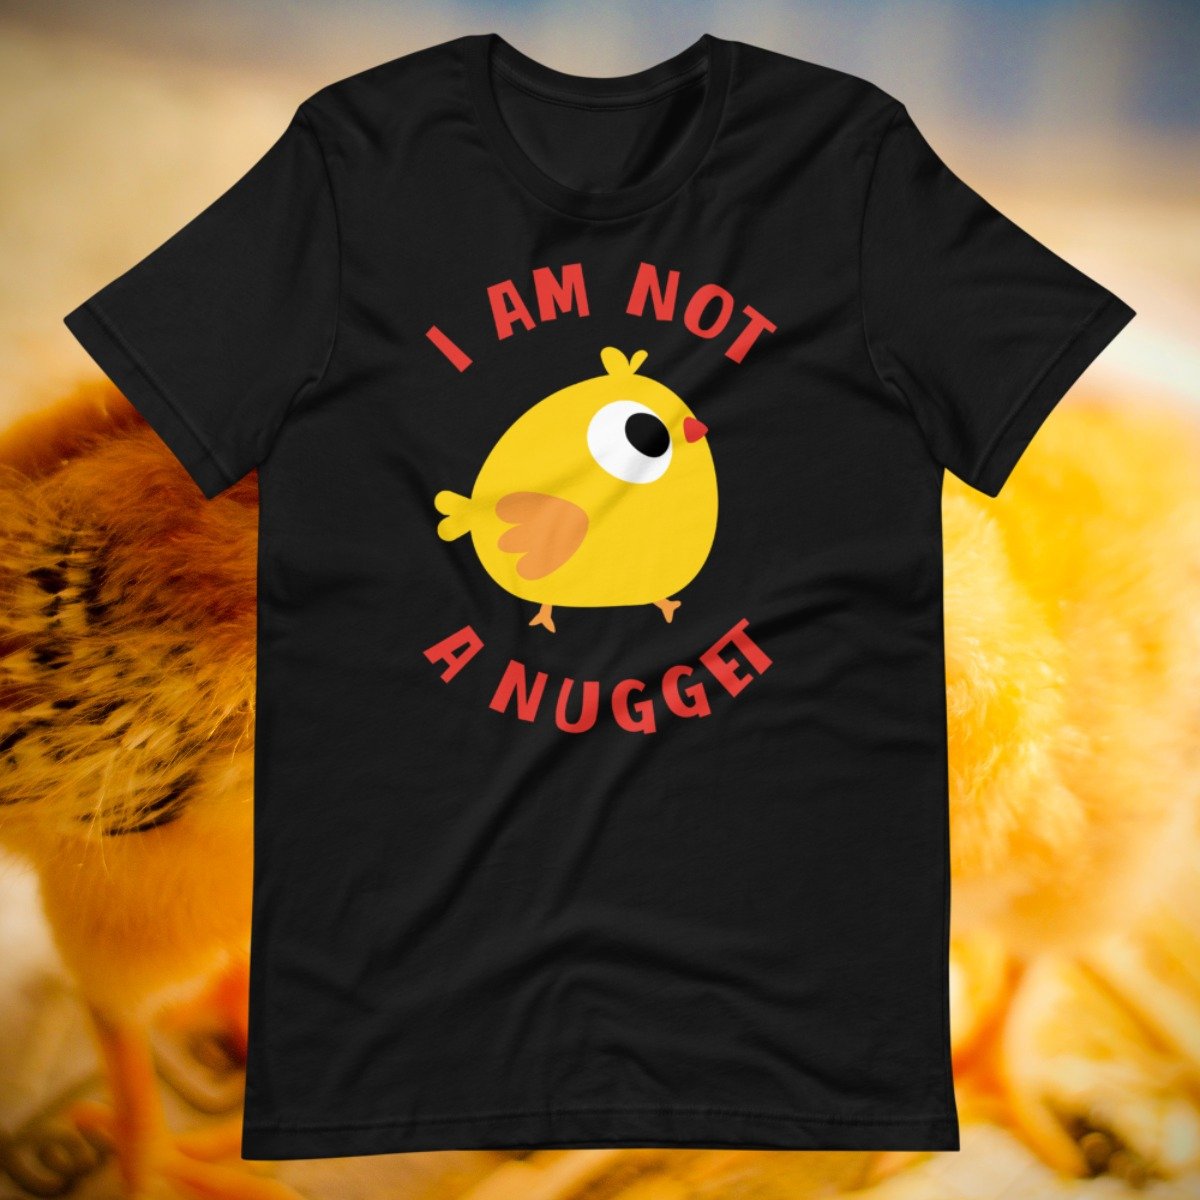 Vegan shirt with a baby chicken declaring they are not a nugget.jpg